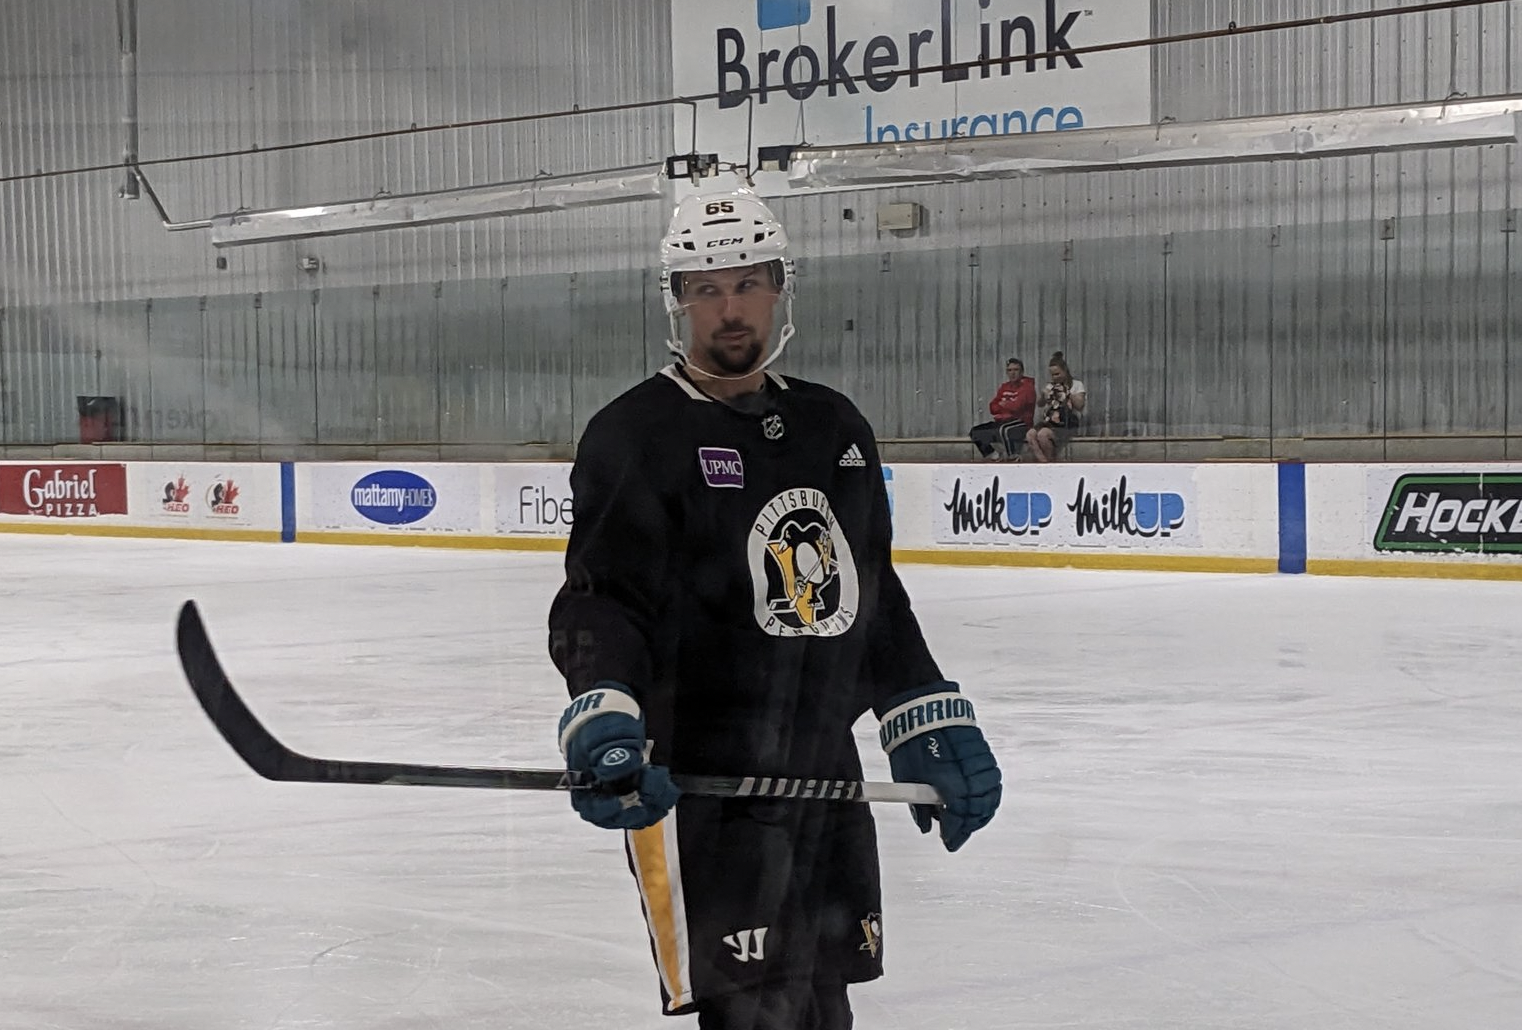 Karlsson in (mostly) Pens gear while practicing in Ottawa. : r